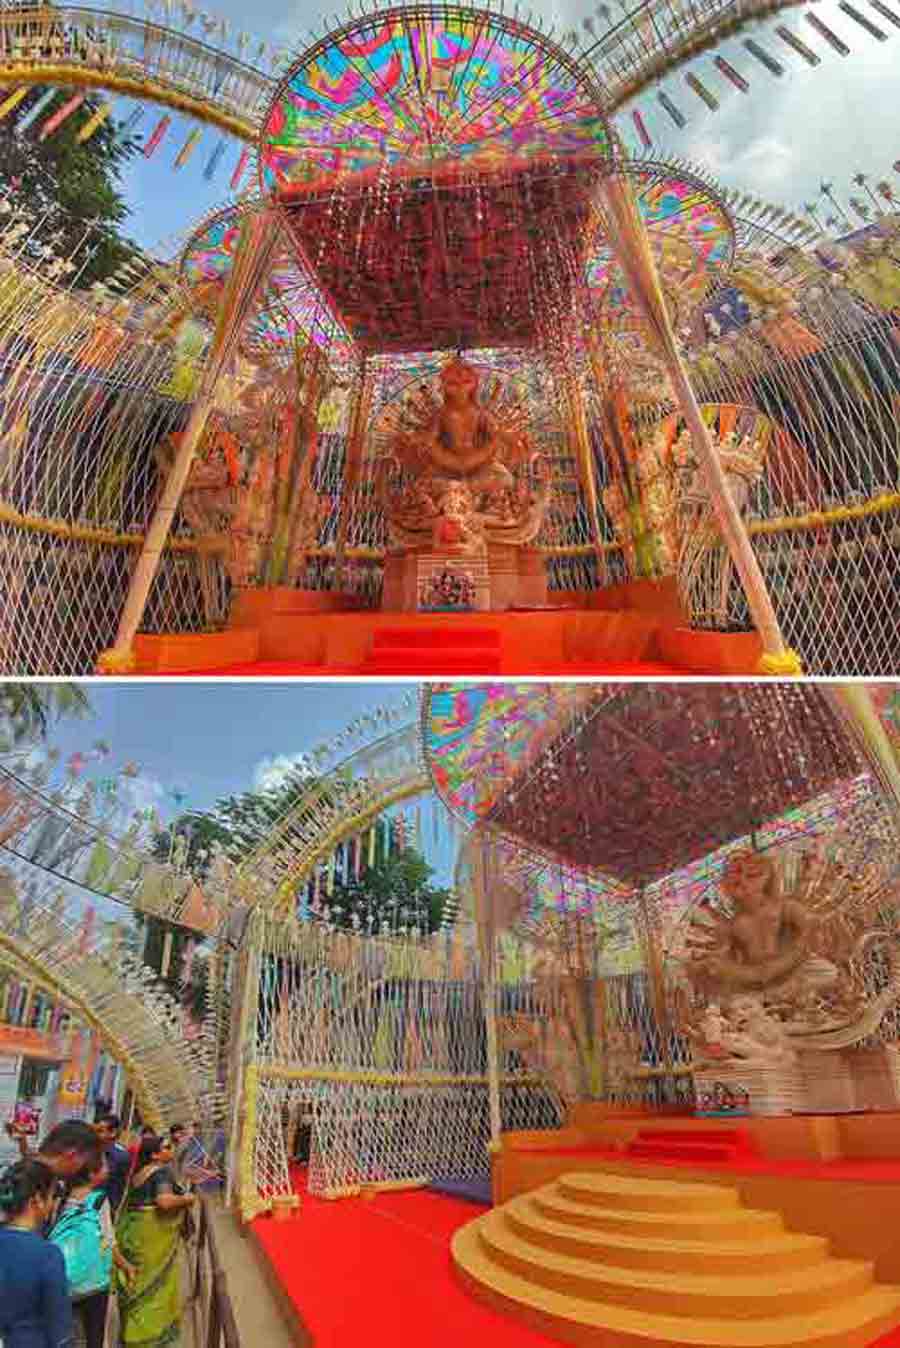 The idol and the open pandal at Tridhara Sammilani define finesse and elegance on Wednesday 